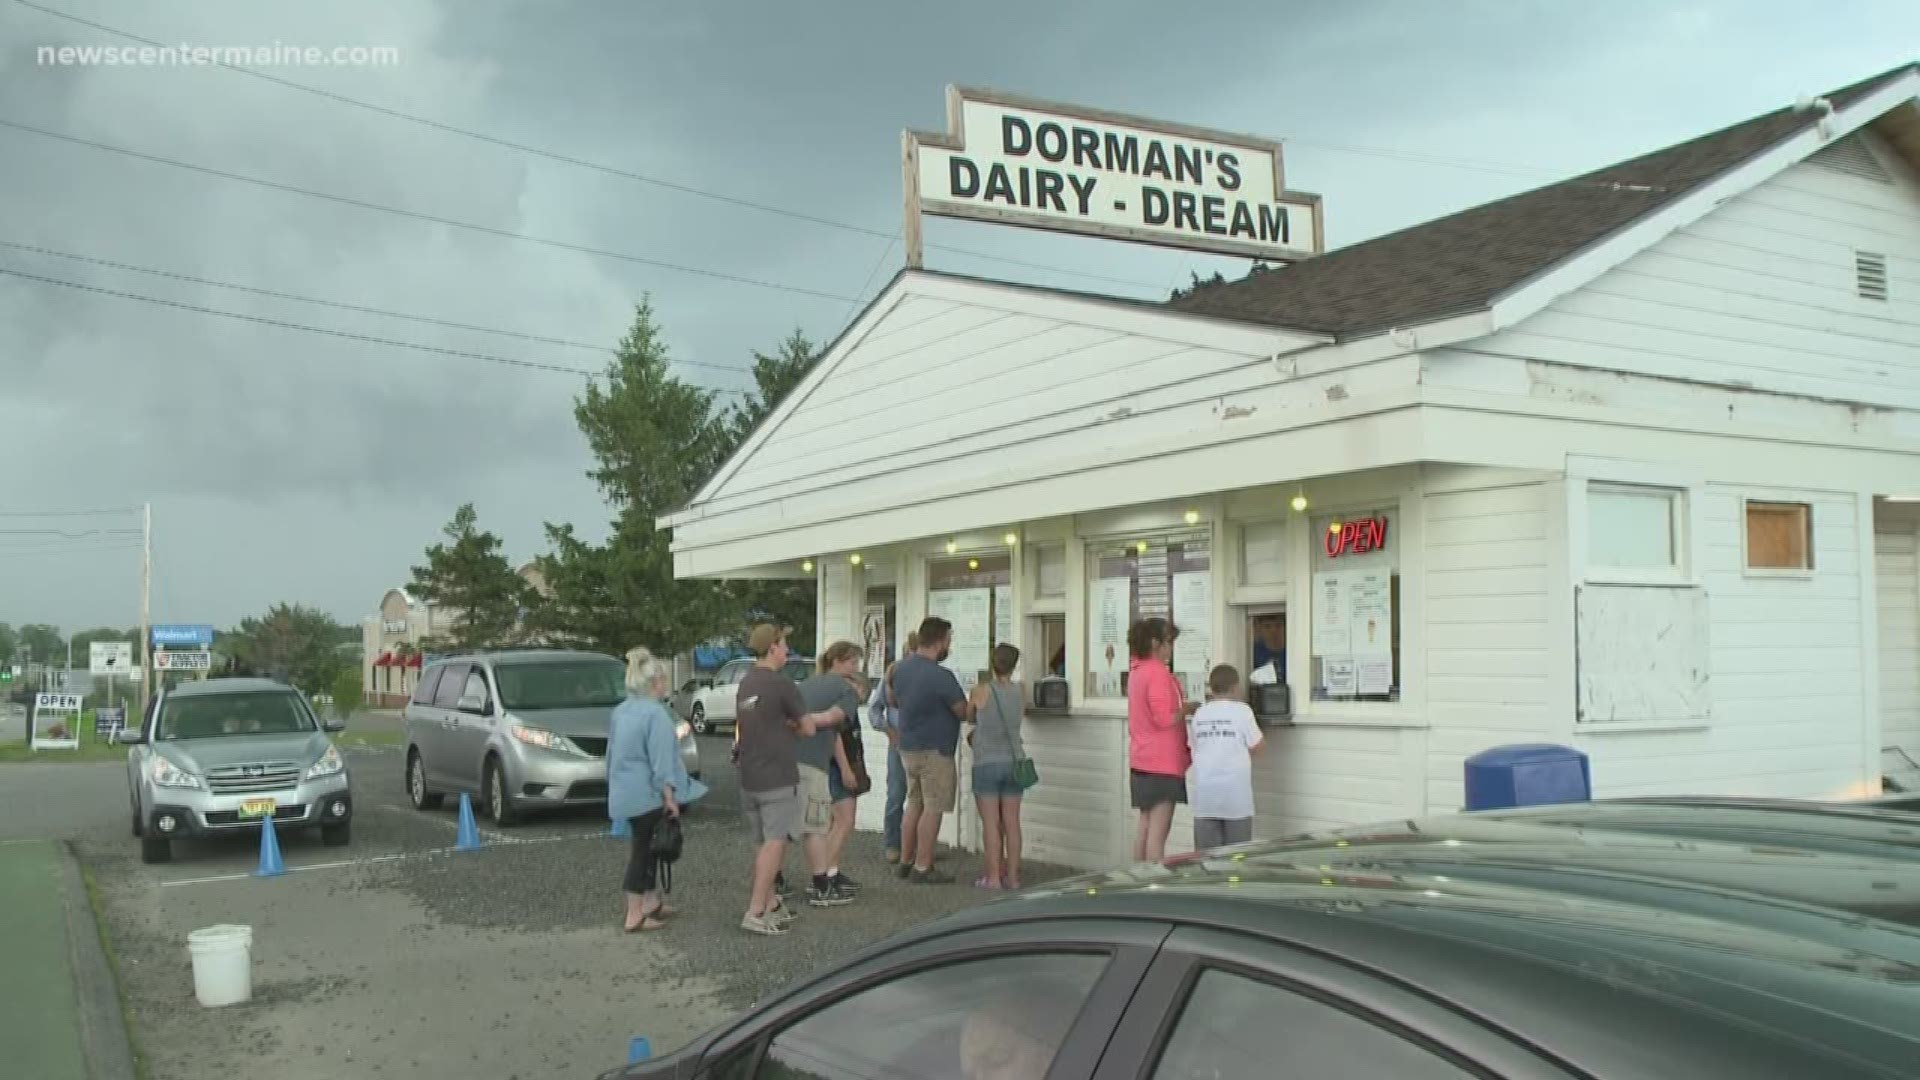 Making ice cream for five generations at Dorman's Dairy.